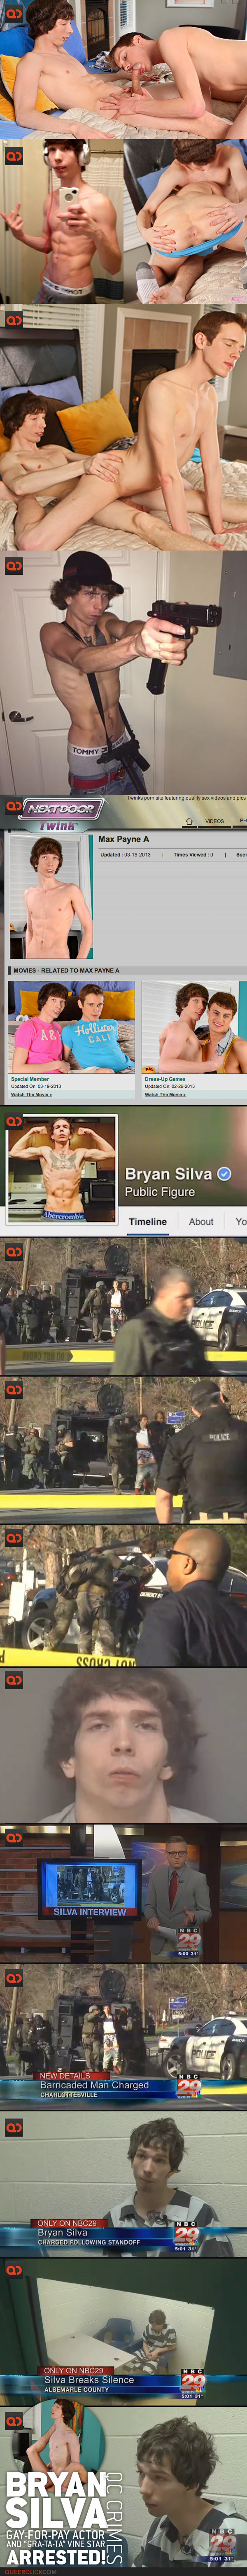 QC Crimes: Bryan Silva, Gay-For-Pay Actor And “Gra-Ta-Ta” Vine Star, Arrested!